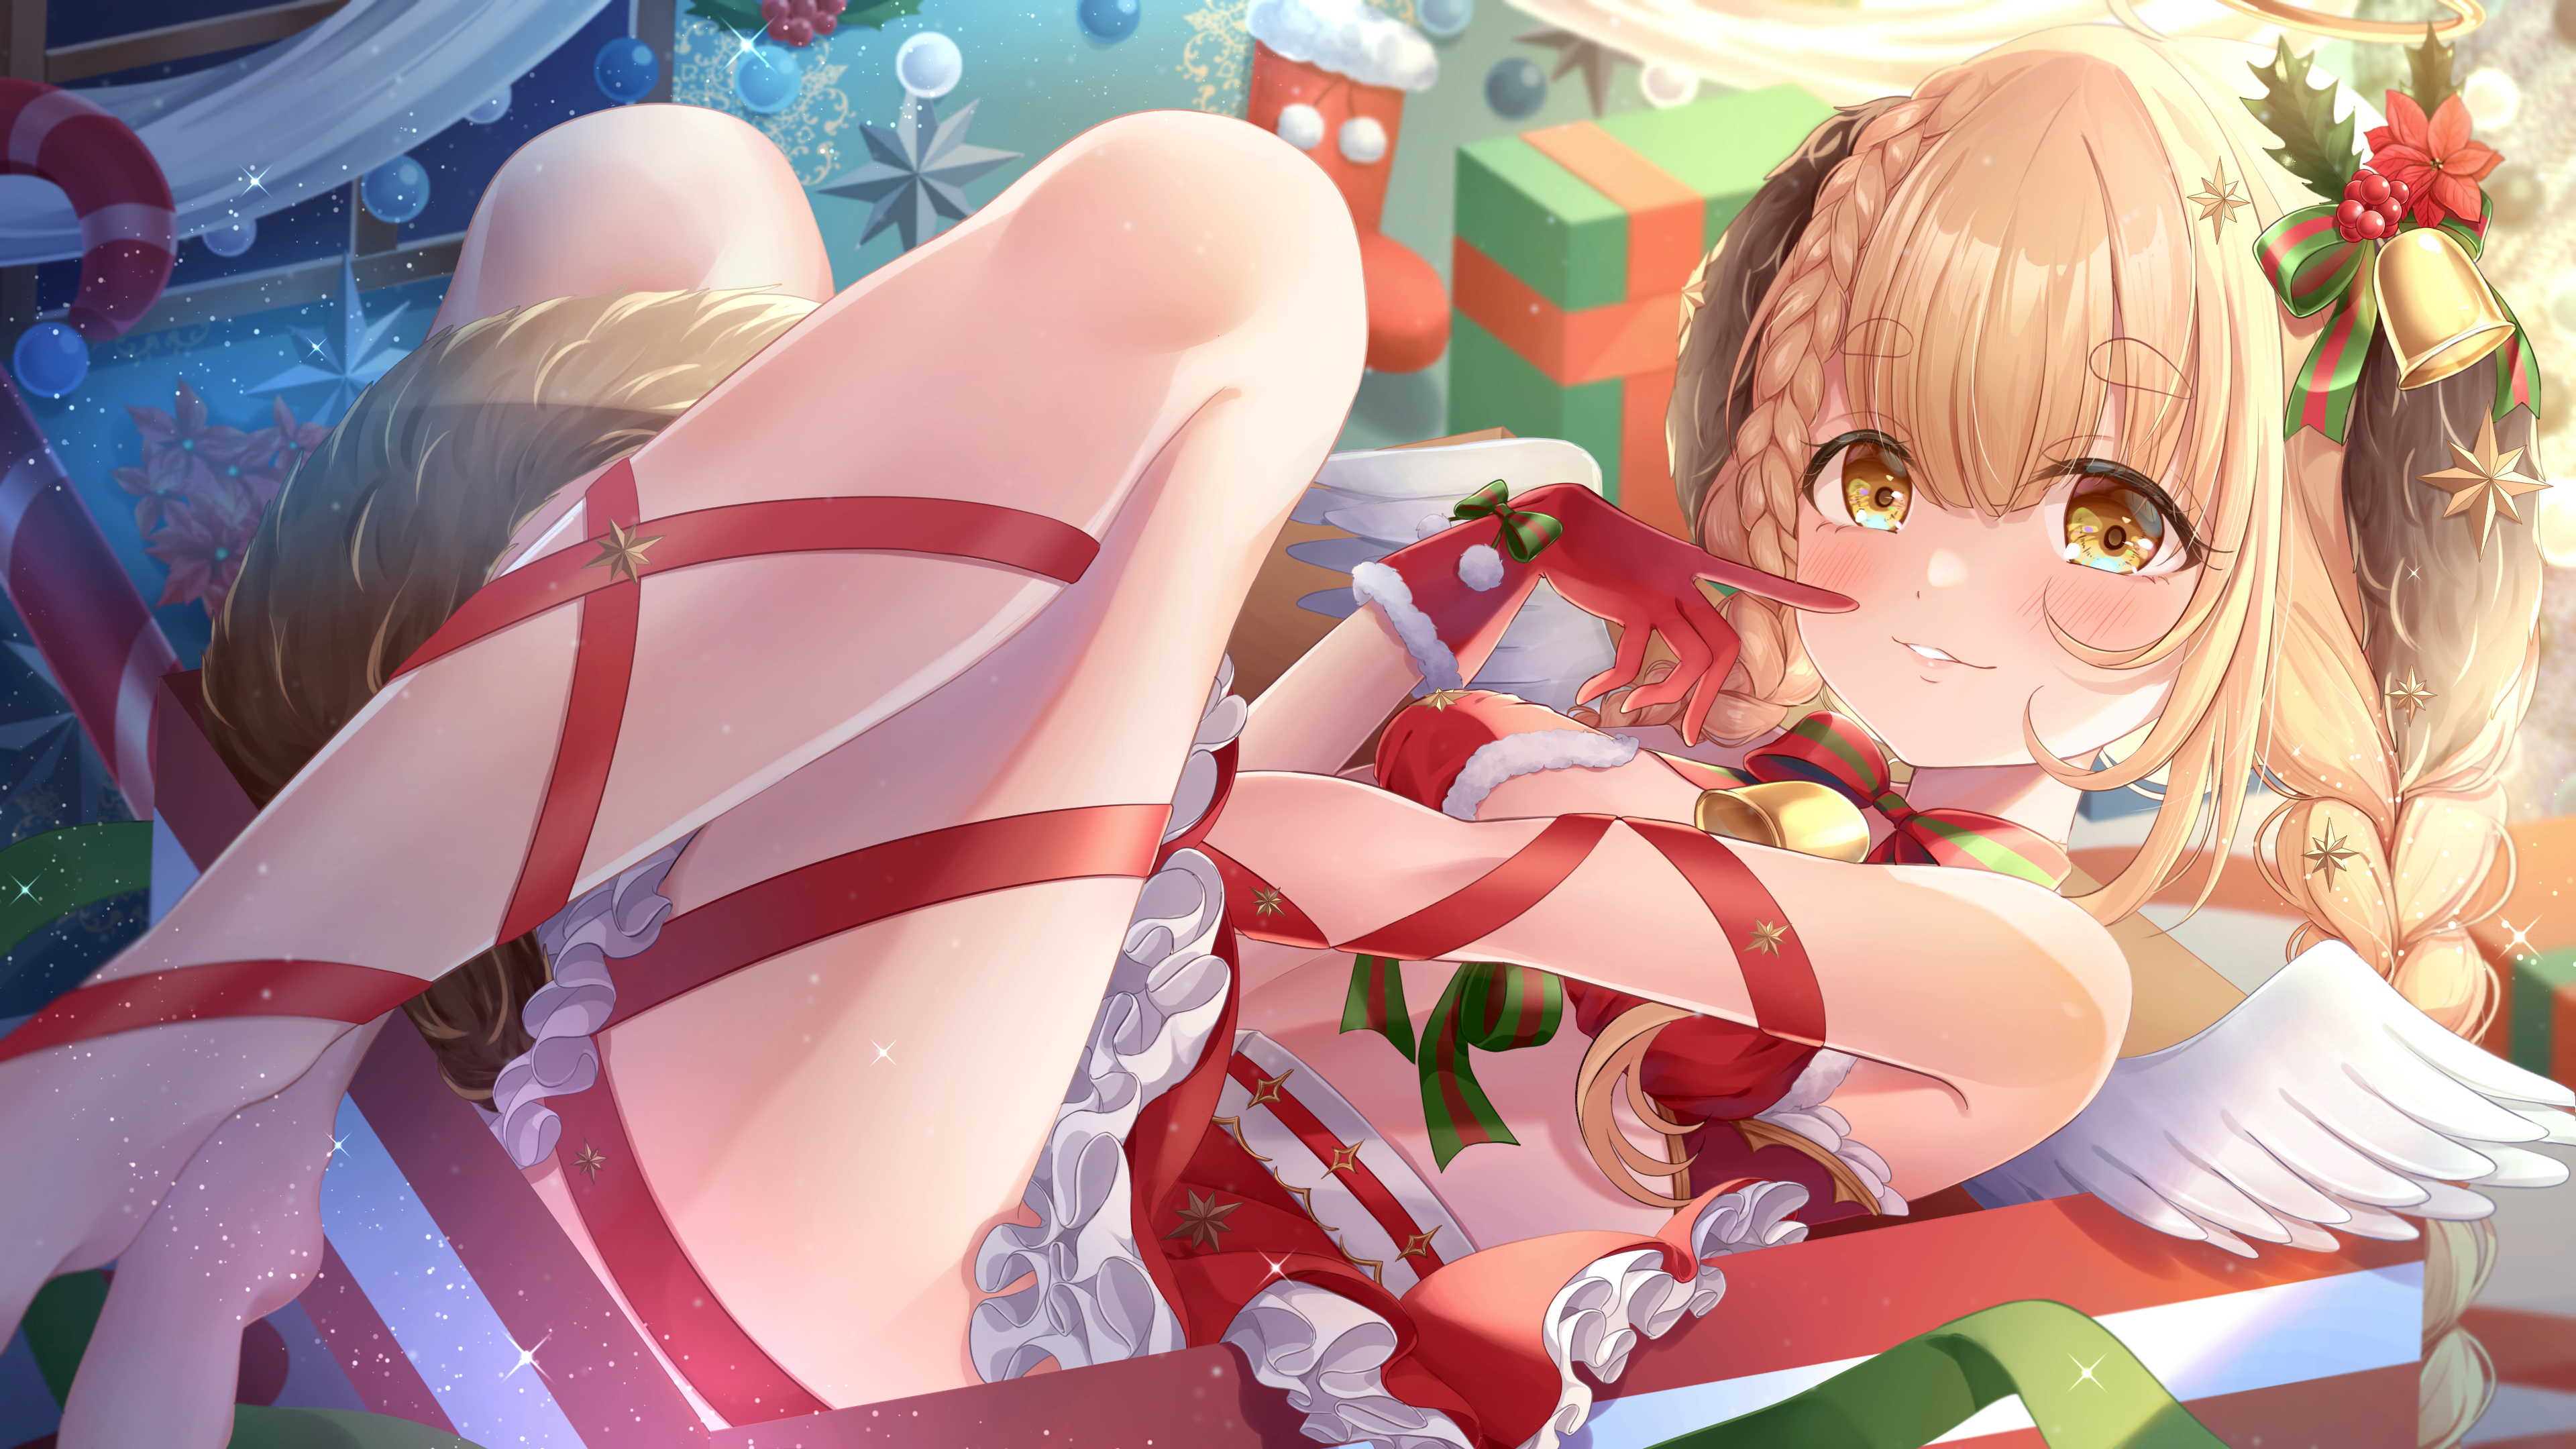 Anime 3840x2160 anime anime girls upskirt confidential_y looking at viewer blonde french braids bent legs lying down lying on back Christmas presents wings Christmas ornaments  frills Christmas pointed toes yellow eyes parted lips red ribbon Candy Cane ribbon hair ornament bells bow tie legs twintails hair between eyes red gloves gloves blushing